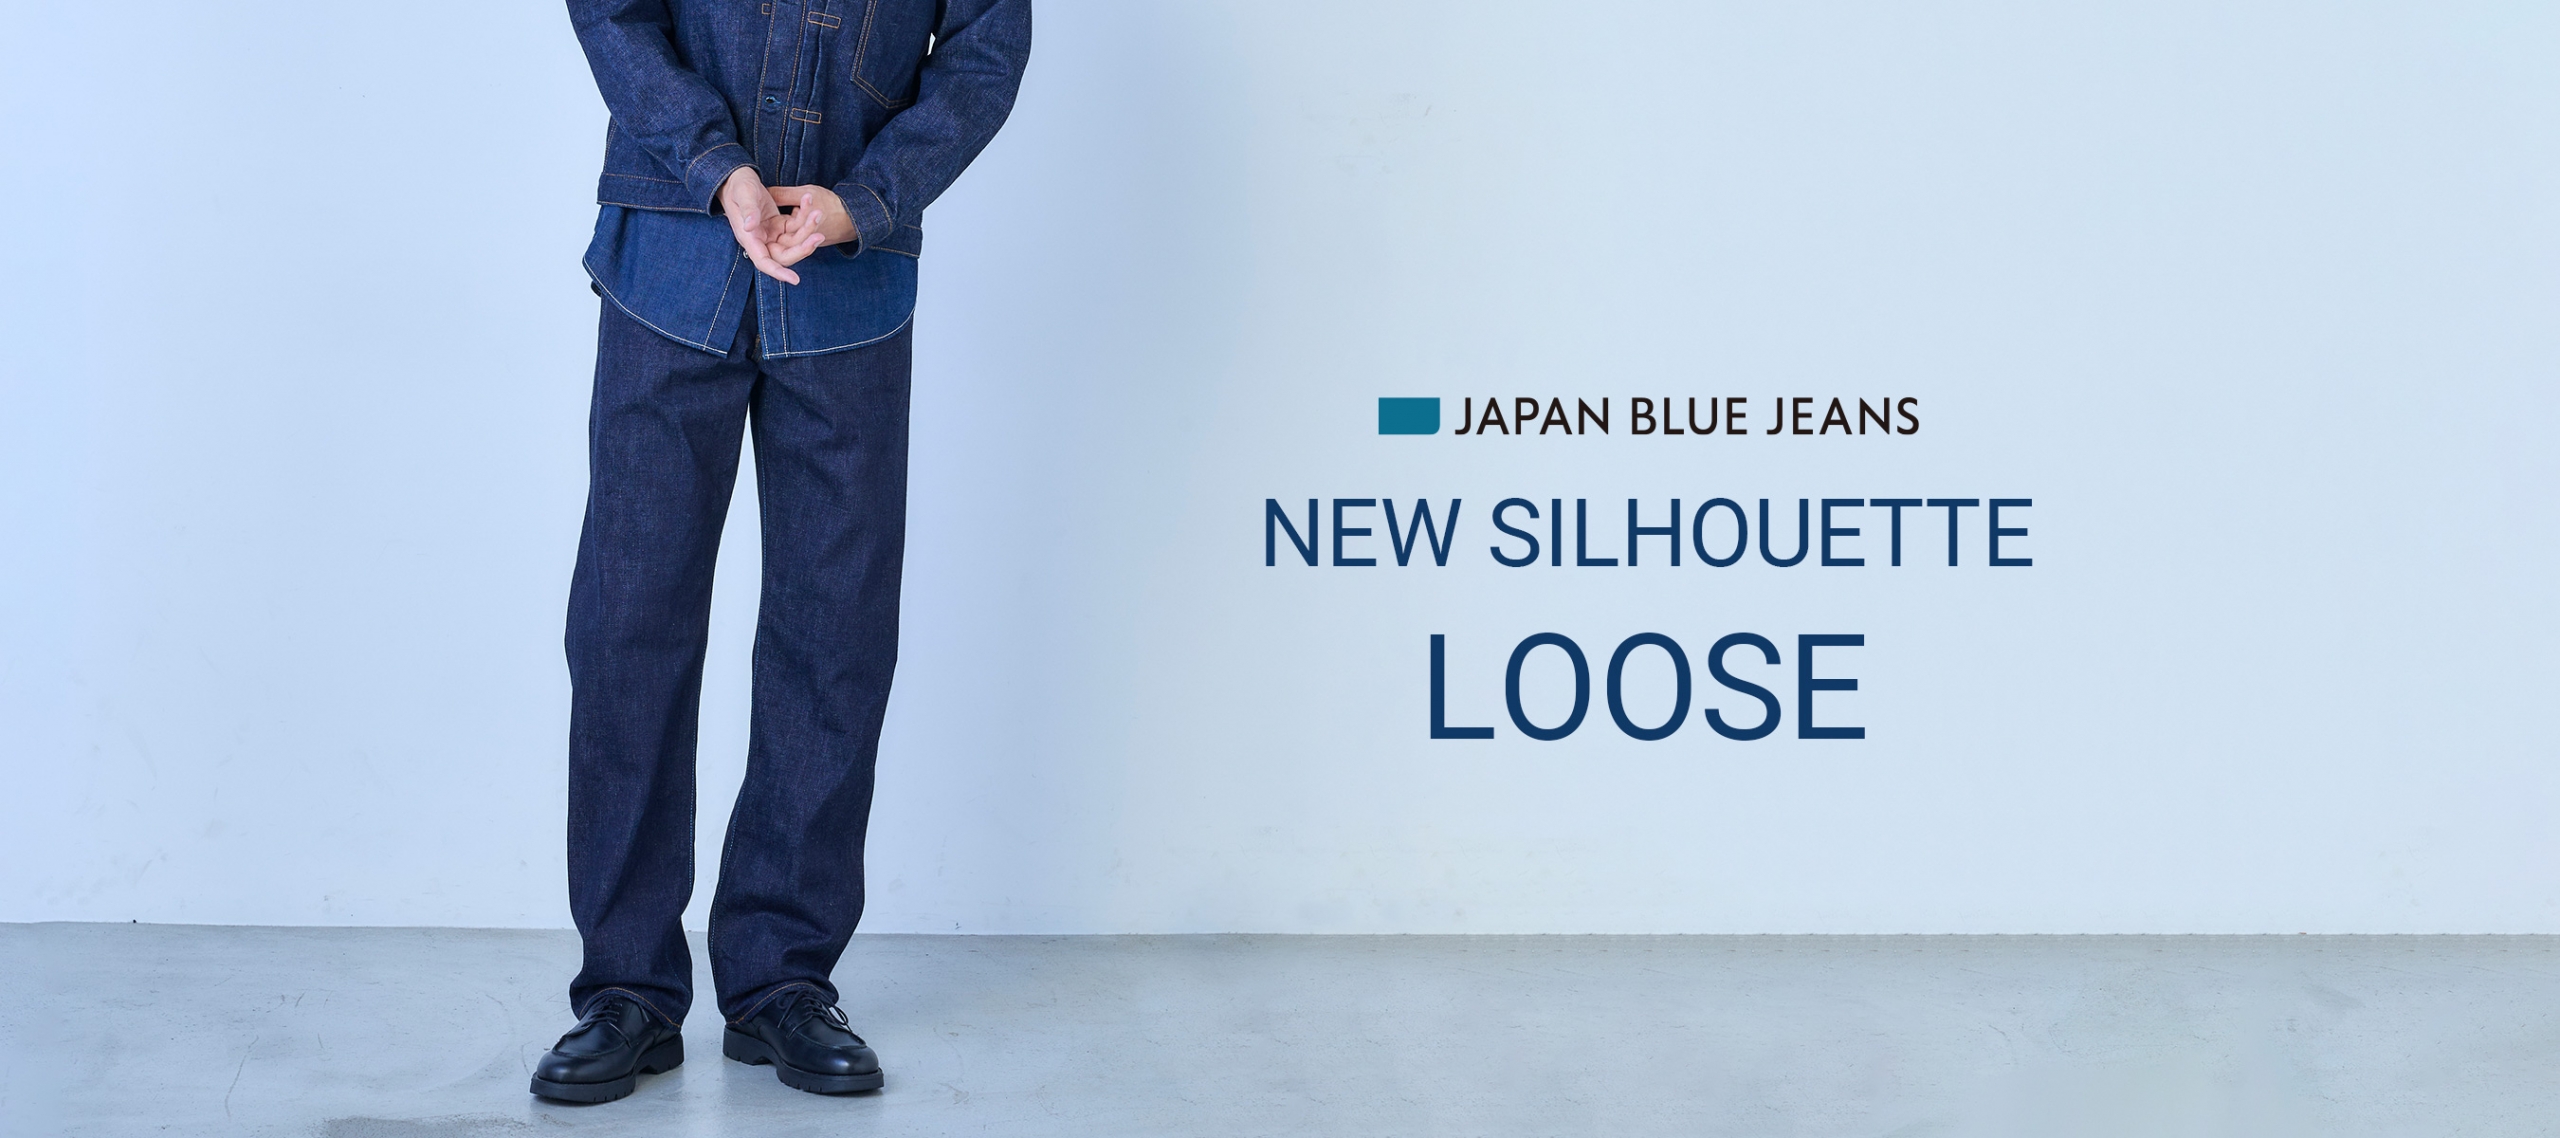 JAPAN BLUE JEANS NEW SILHOUETTE LOOSE PC版